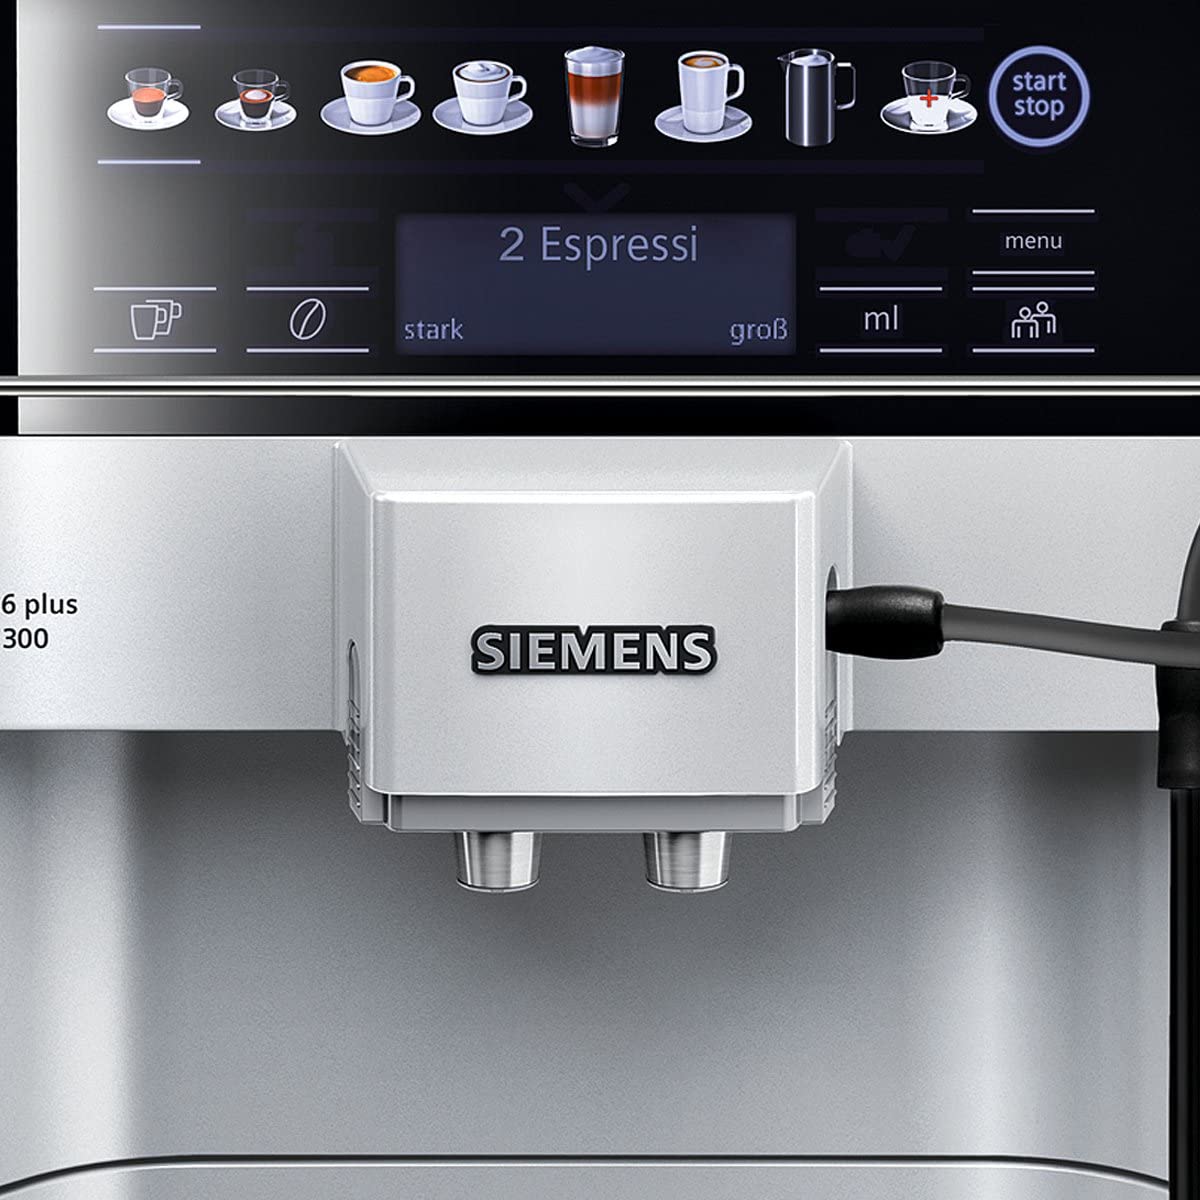 Siemens EQ.6 Plus s300 TE653501DE Fully Automatic Coffee Machine (1,500 Watts, Ceramic Grinder, Touch Sensor Direct Selection Buttons, Personalised Drink) Silver